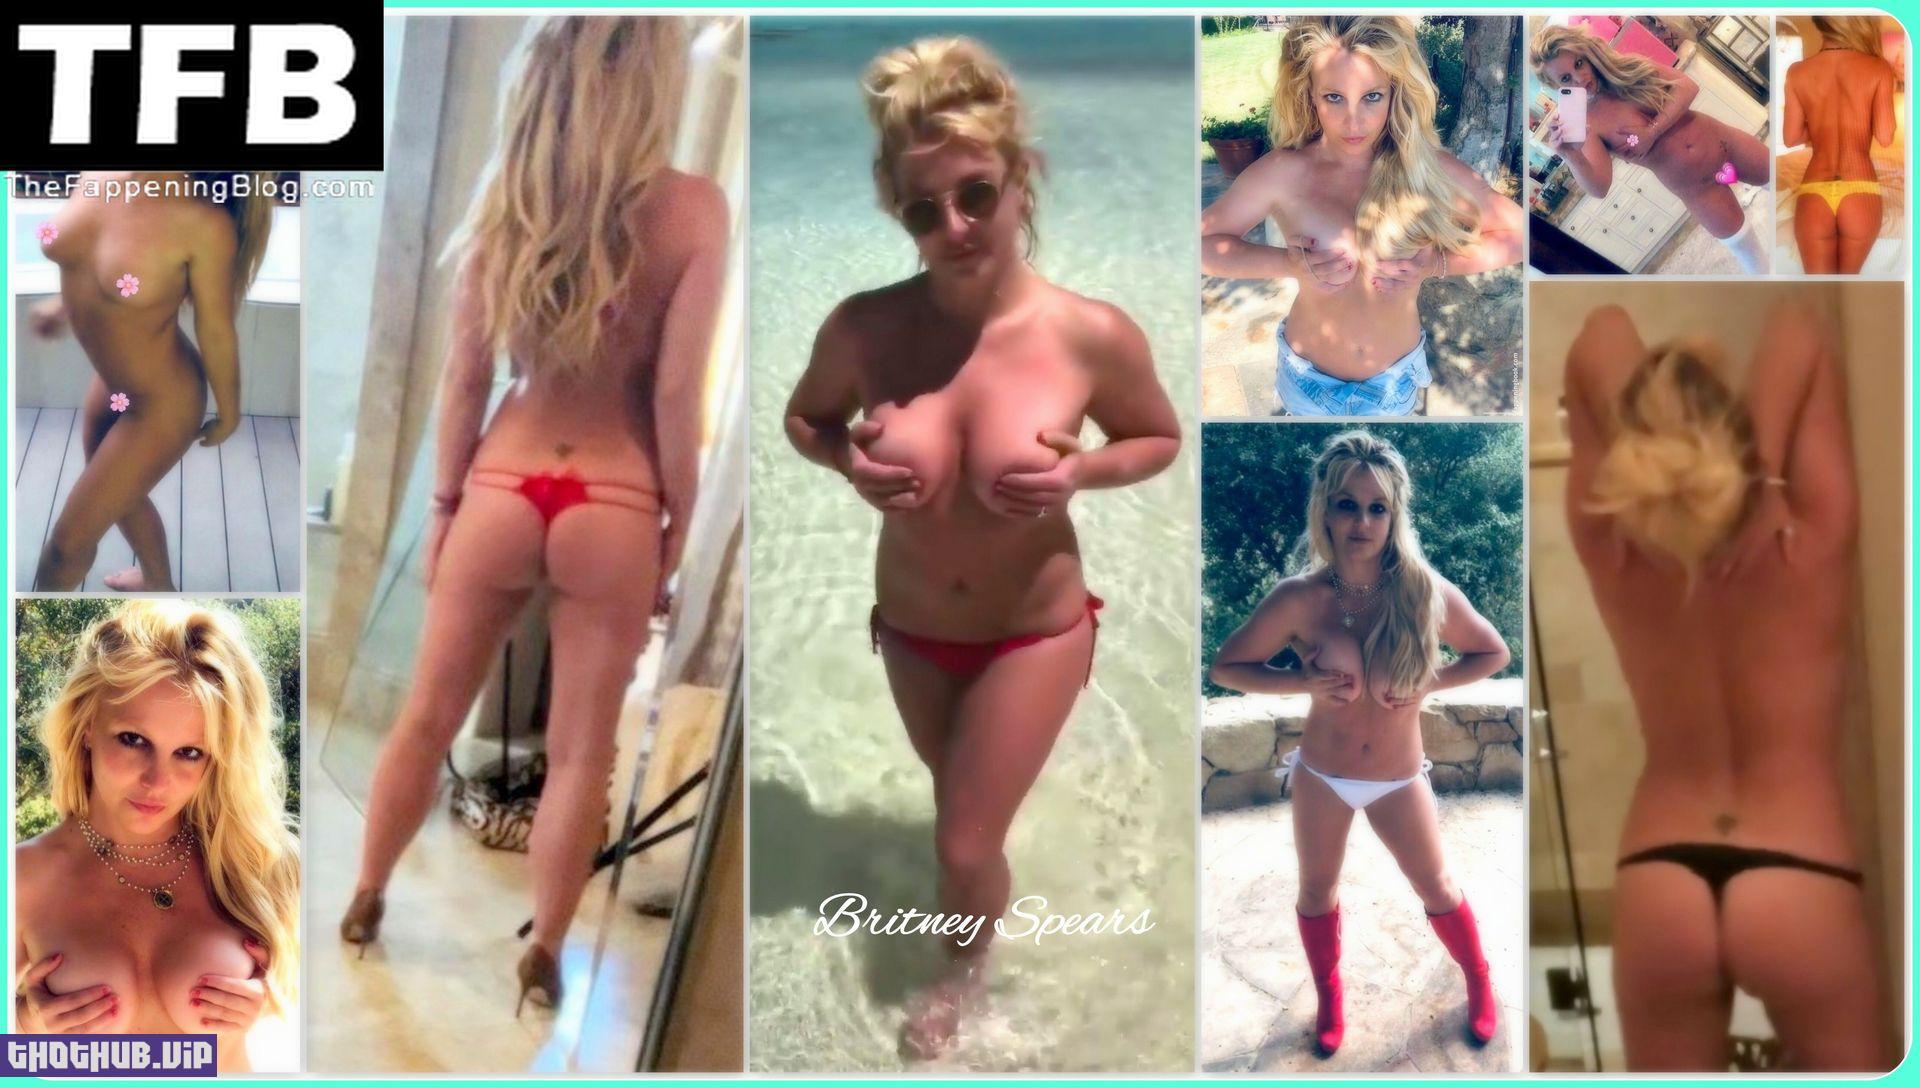 britney spears leaks 88552 thefappeningblog.com